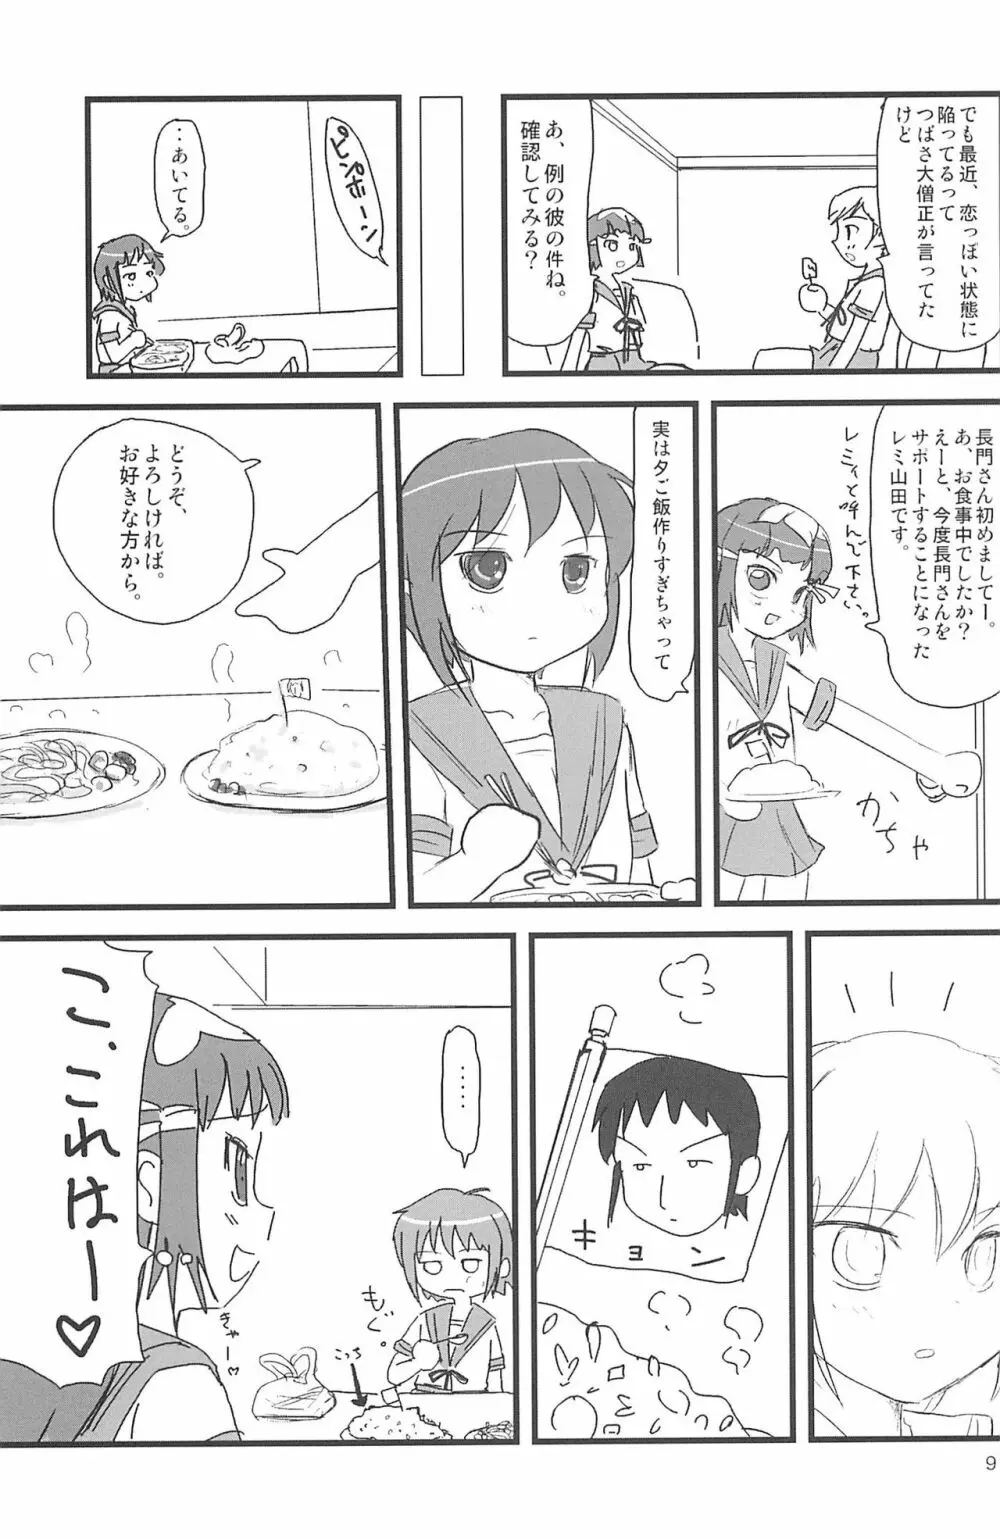 ND-special Volume 5 91ページ